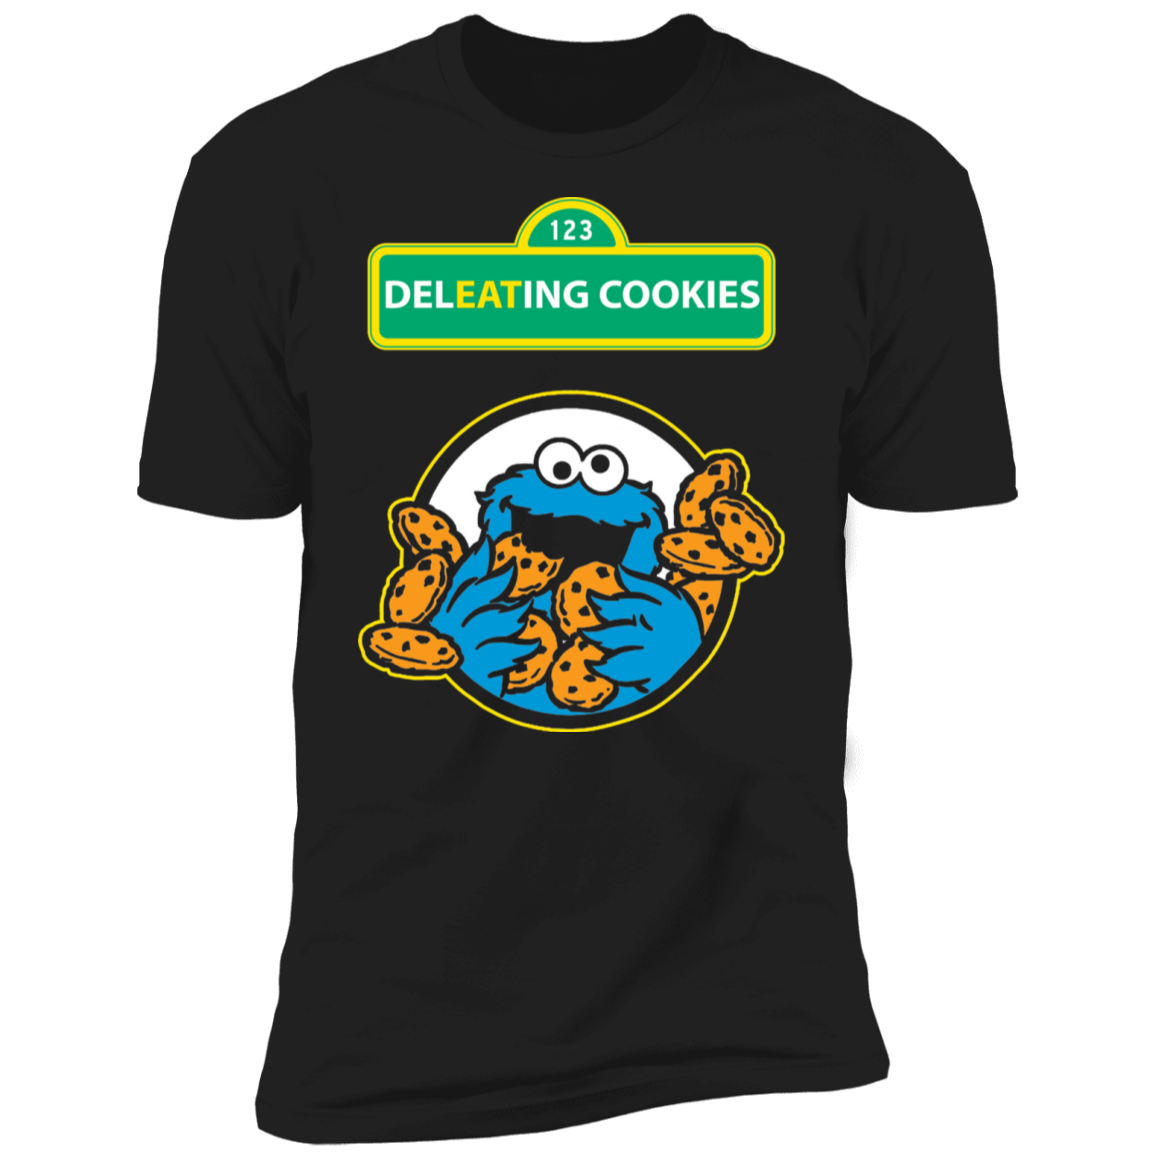 ArtichokeUSA Custom Design #55. DelEATing Cookes. IT humor. Cookie Monster Parody. Ultra Soft Cotton T-Shirt